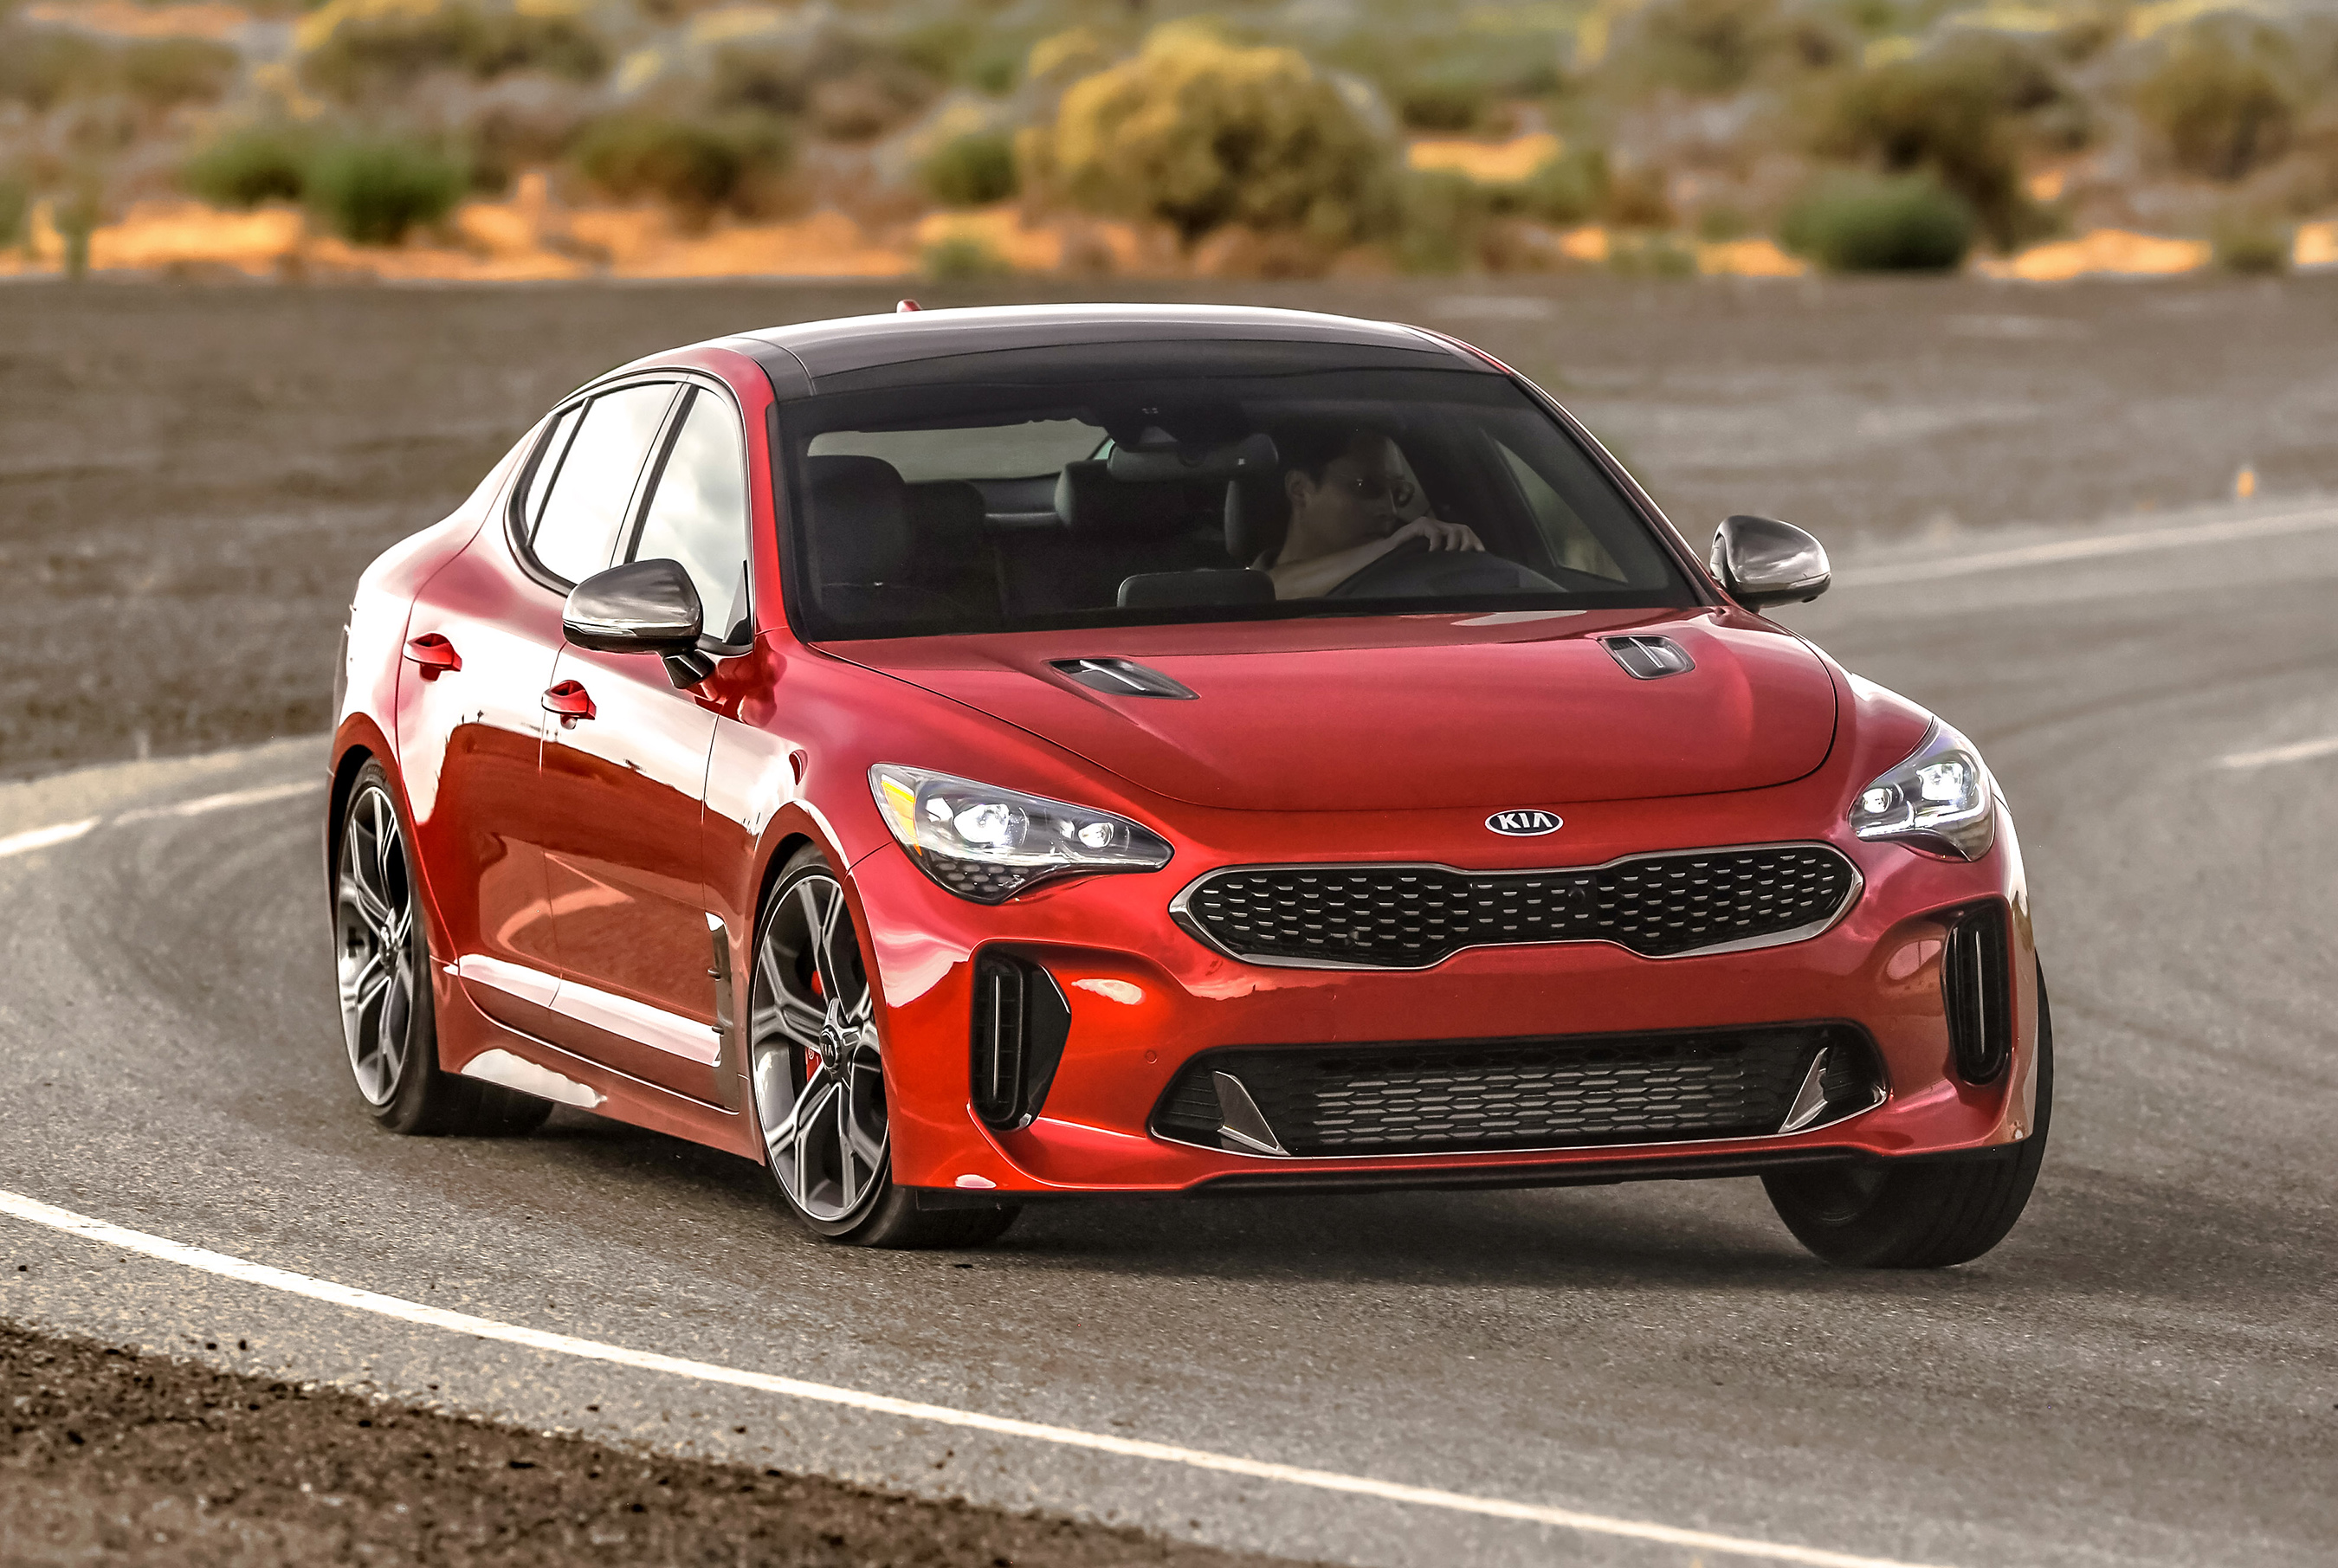 Kia’s Super Bowl ad is the cornerstone for the brand’s “Fueled by Youth, A State of Mind” marketing campaign for the all-new 2018 Stinger.